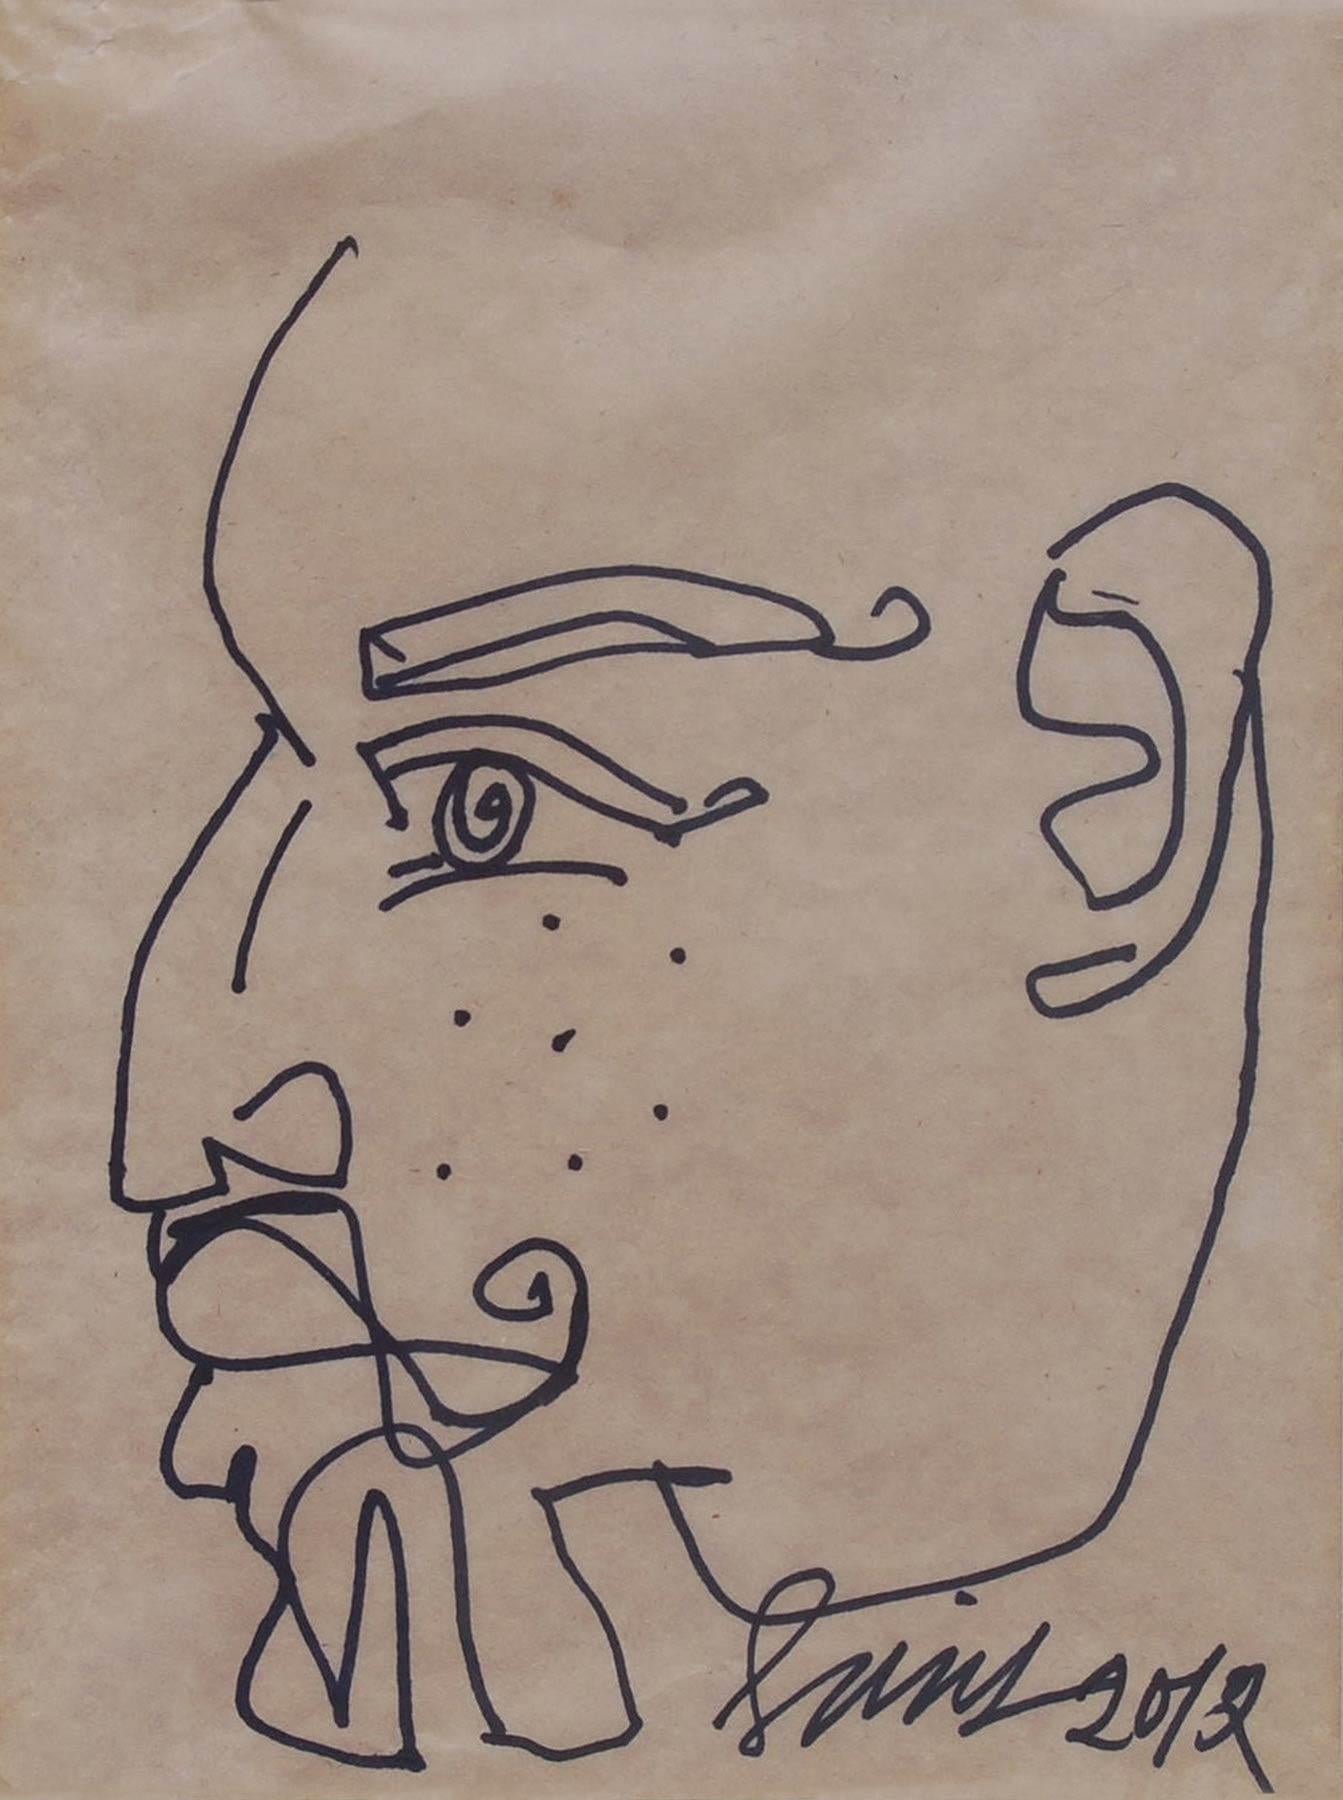 Sunil Das - Untitled - 9 x 7 inches (unframed size)
Pen and Ink on Paper, 2010 & 2012 (Set of 2)
Inclusive of shipment in ready to hang form.

The exceptions are the faces such as the profiles of bearded men in which the content is a mere excuse for